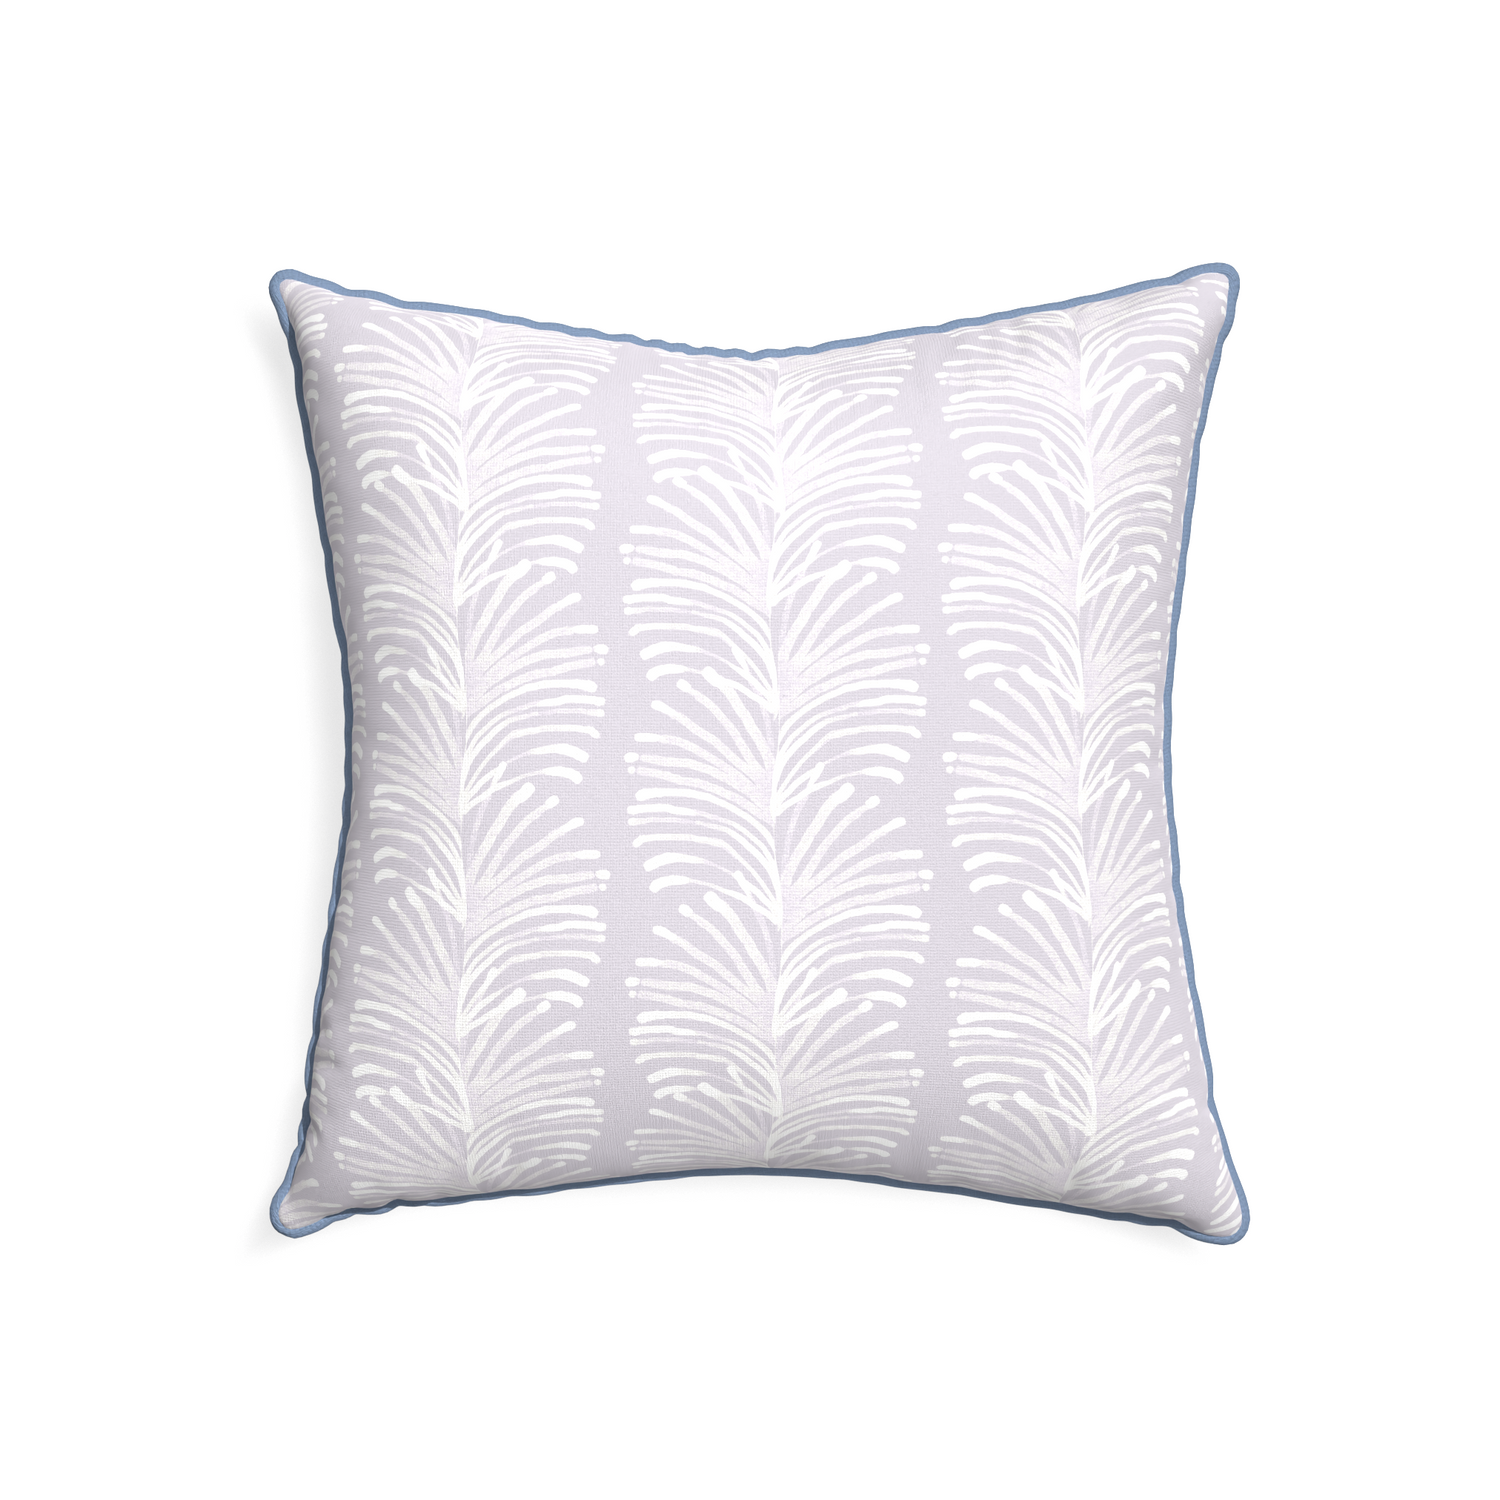 22-square emma lavender custom lavender botanical stripepillow with sky piping on white background